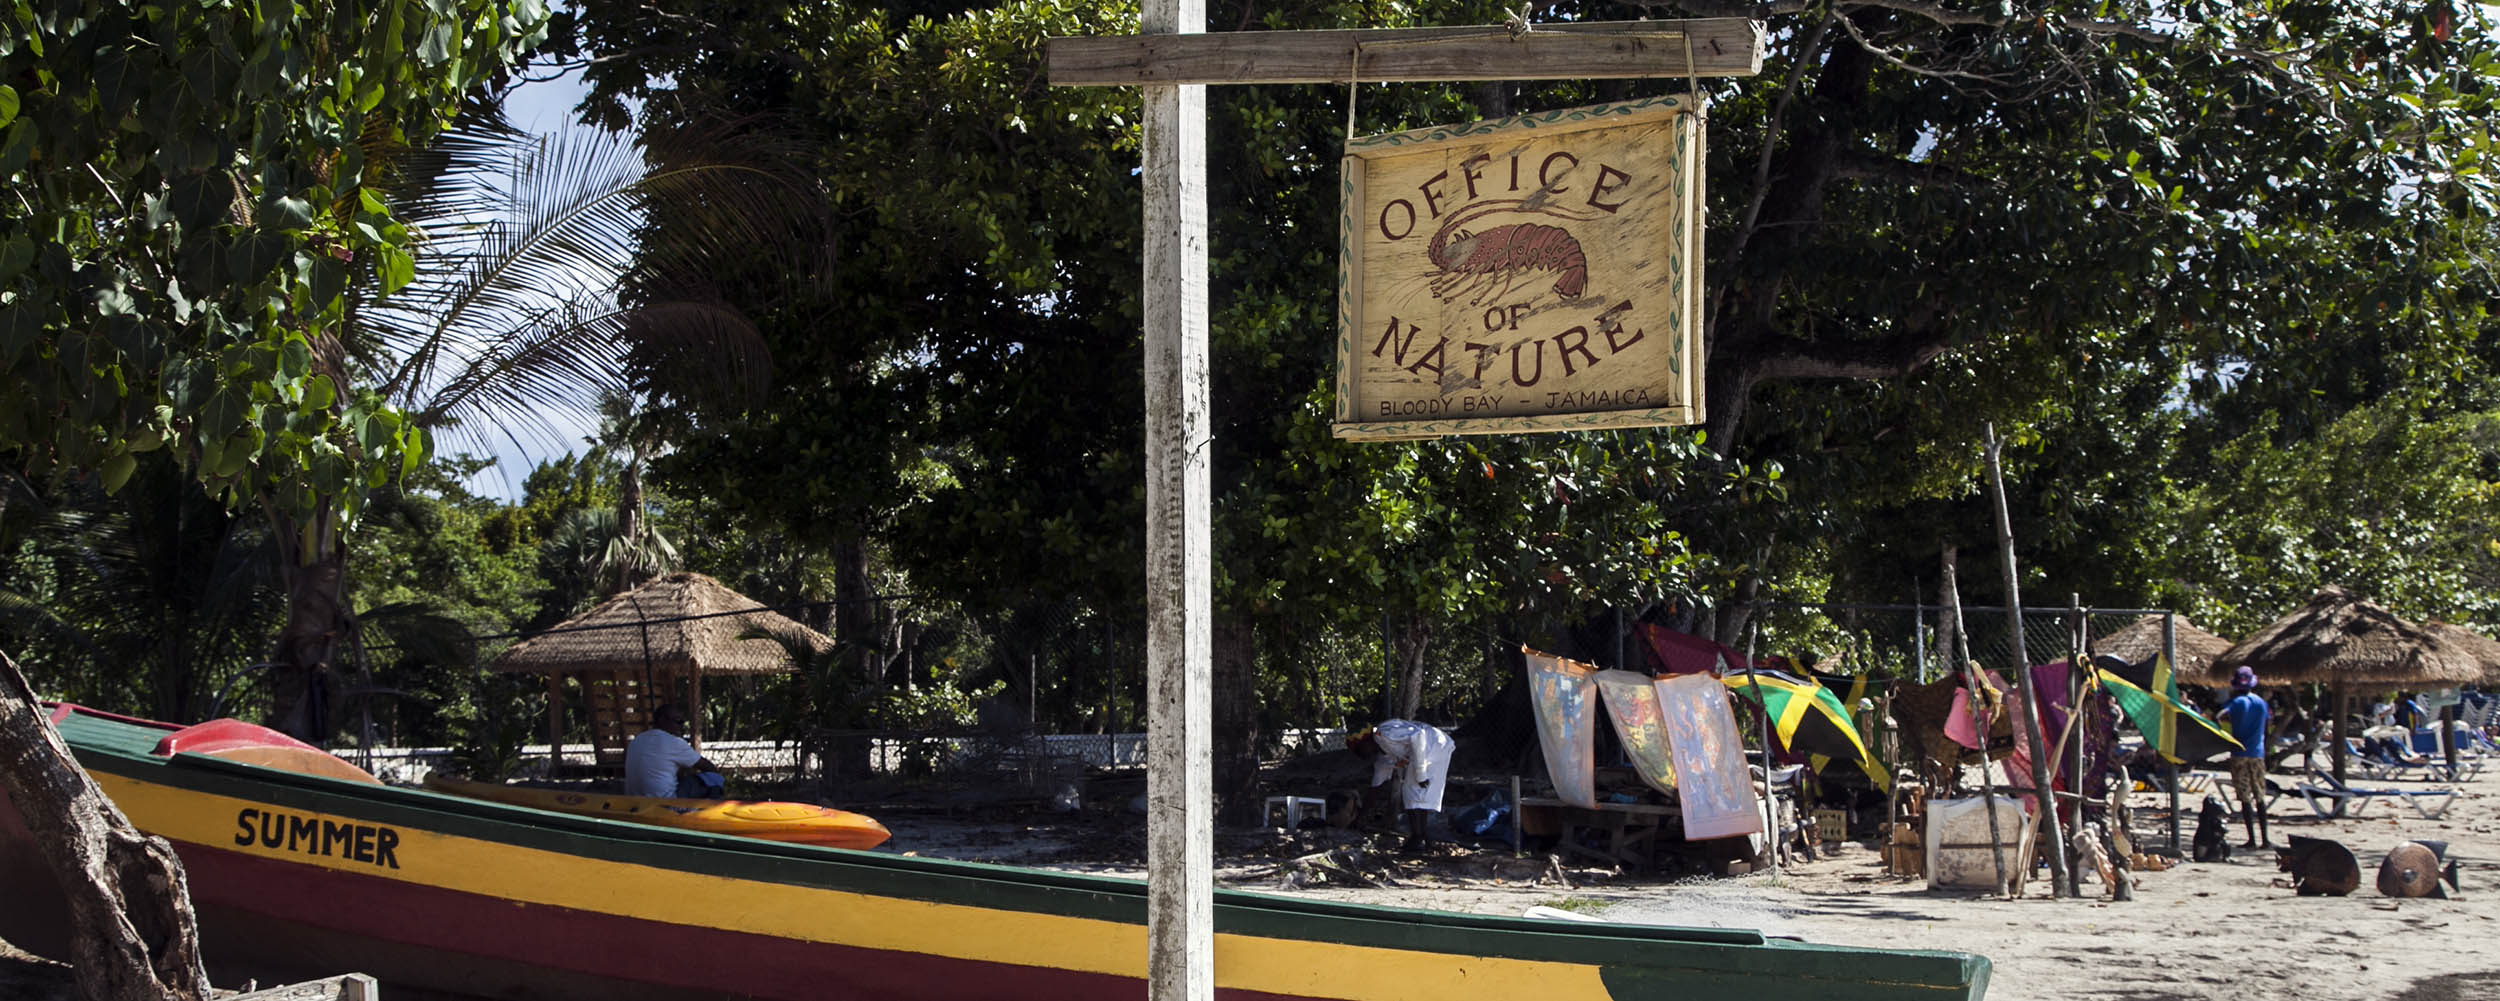 Office of Nature @ Negril Beach, Negril Jamaica